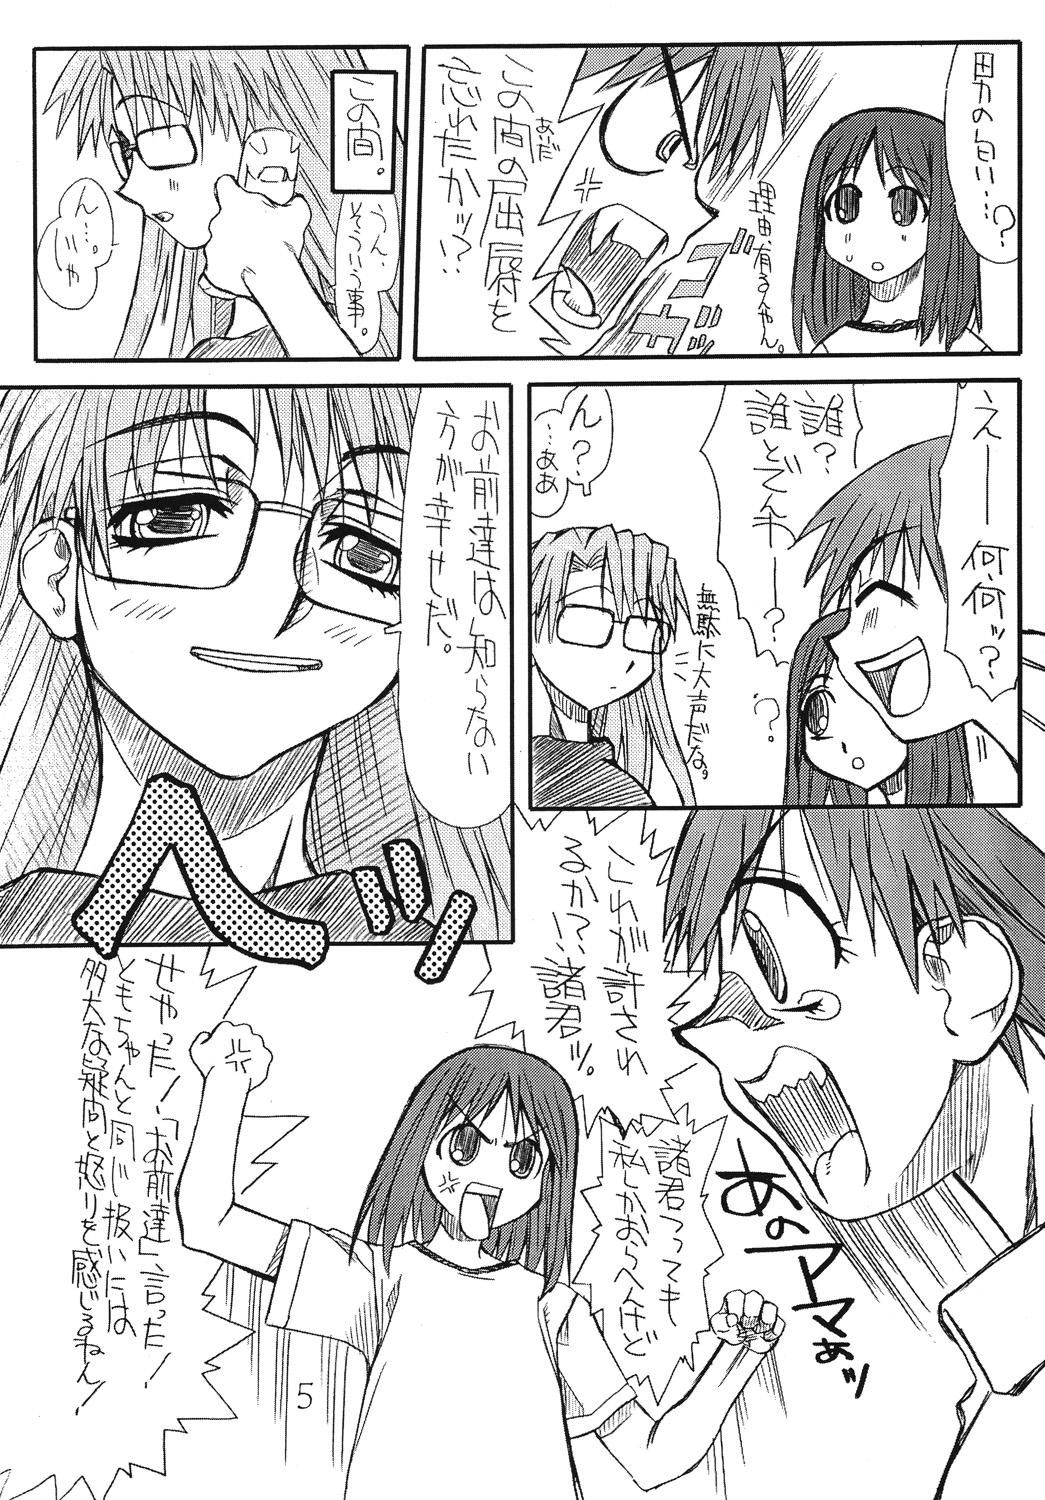 Gaygroup Love Cat 3 - Azumanga daioh Family Roleplay - Page 4